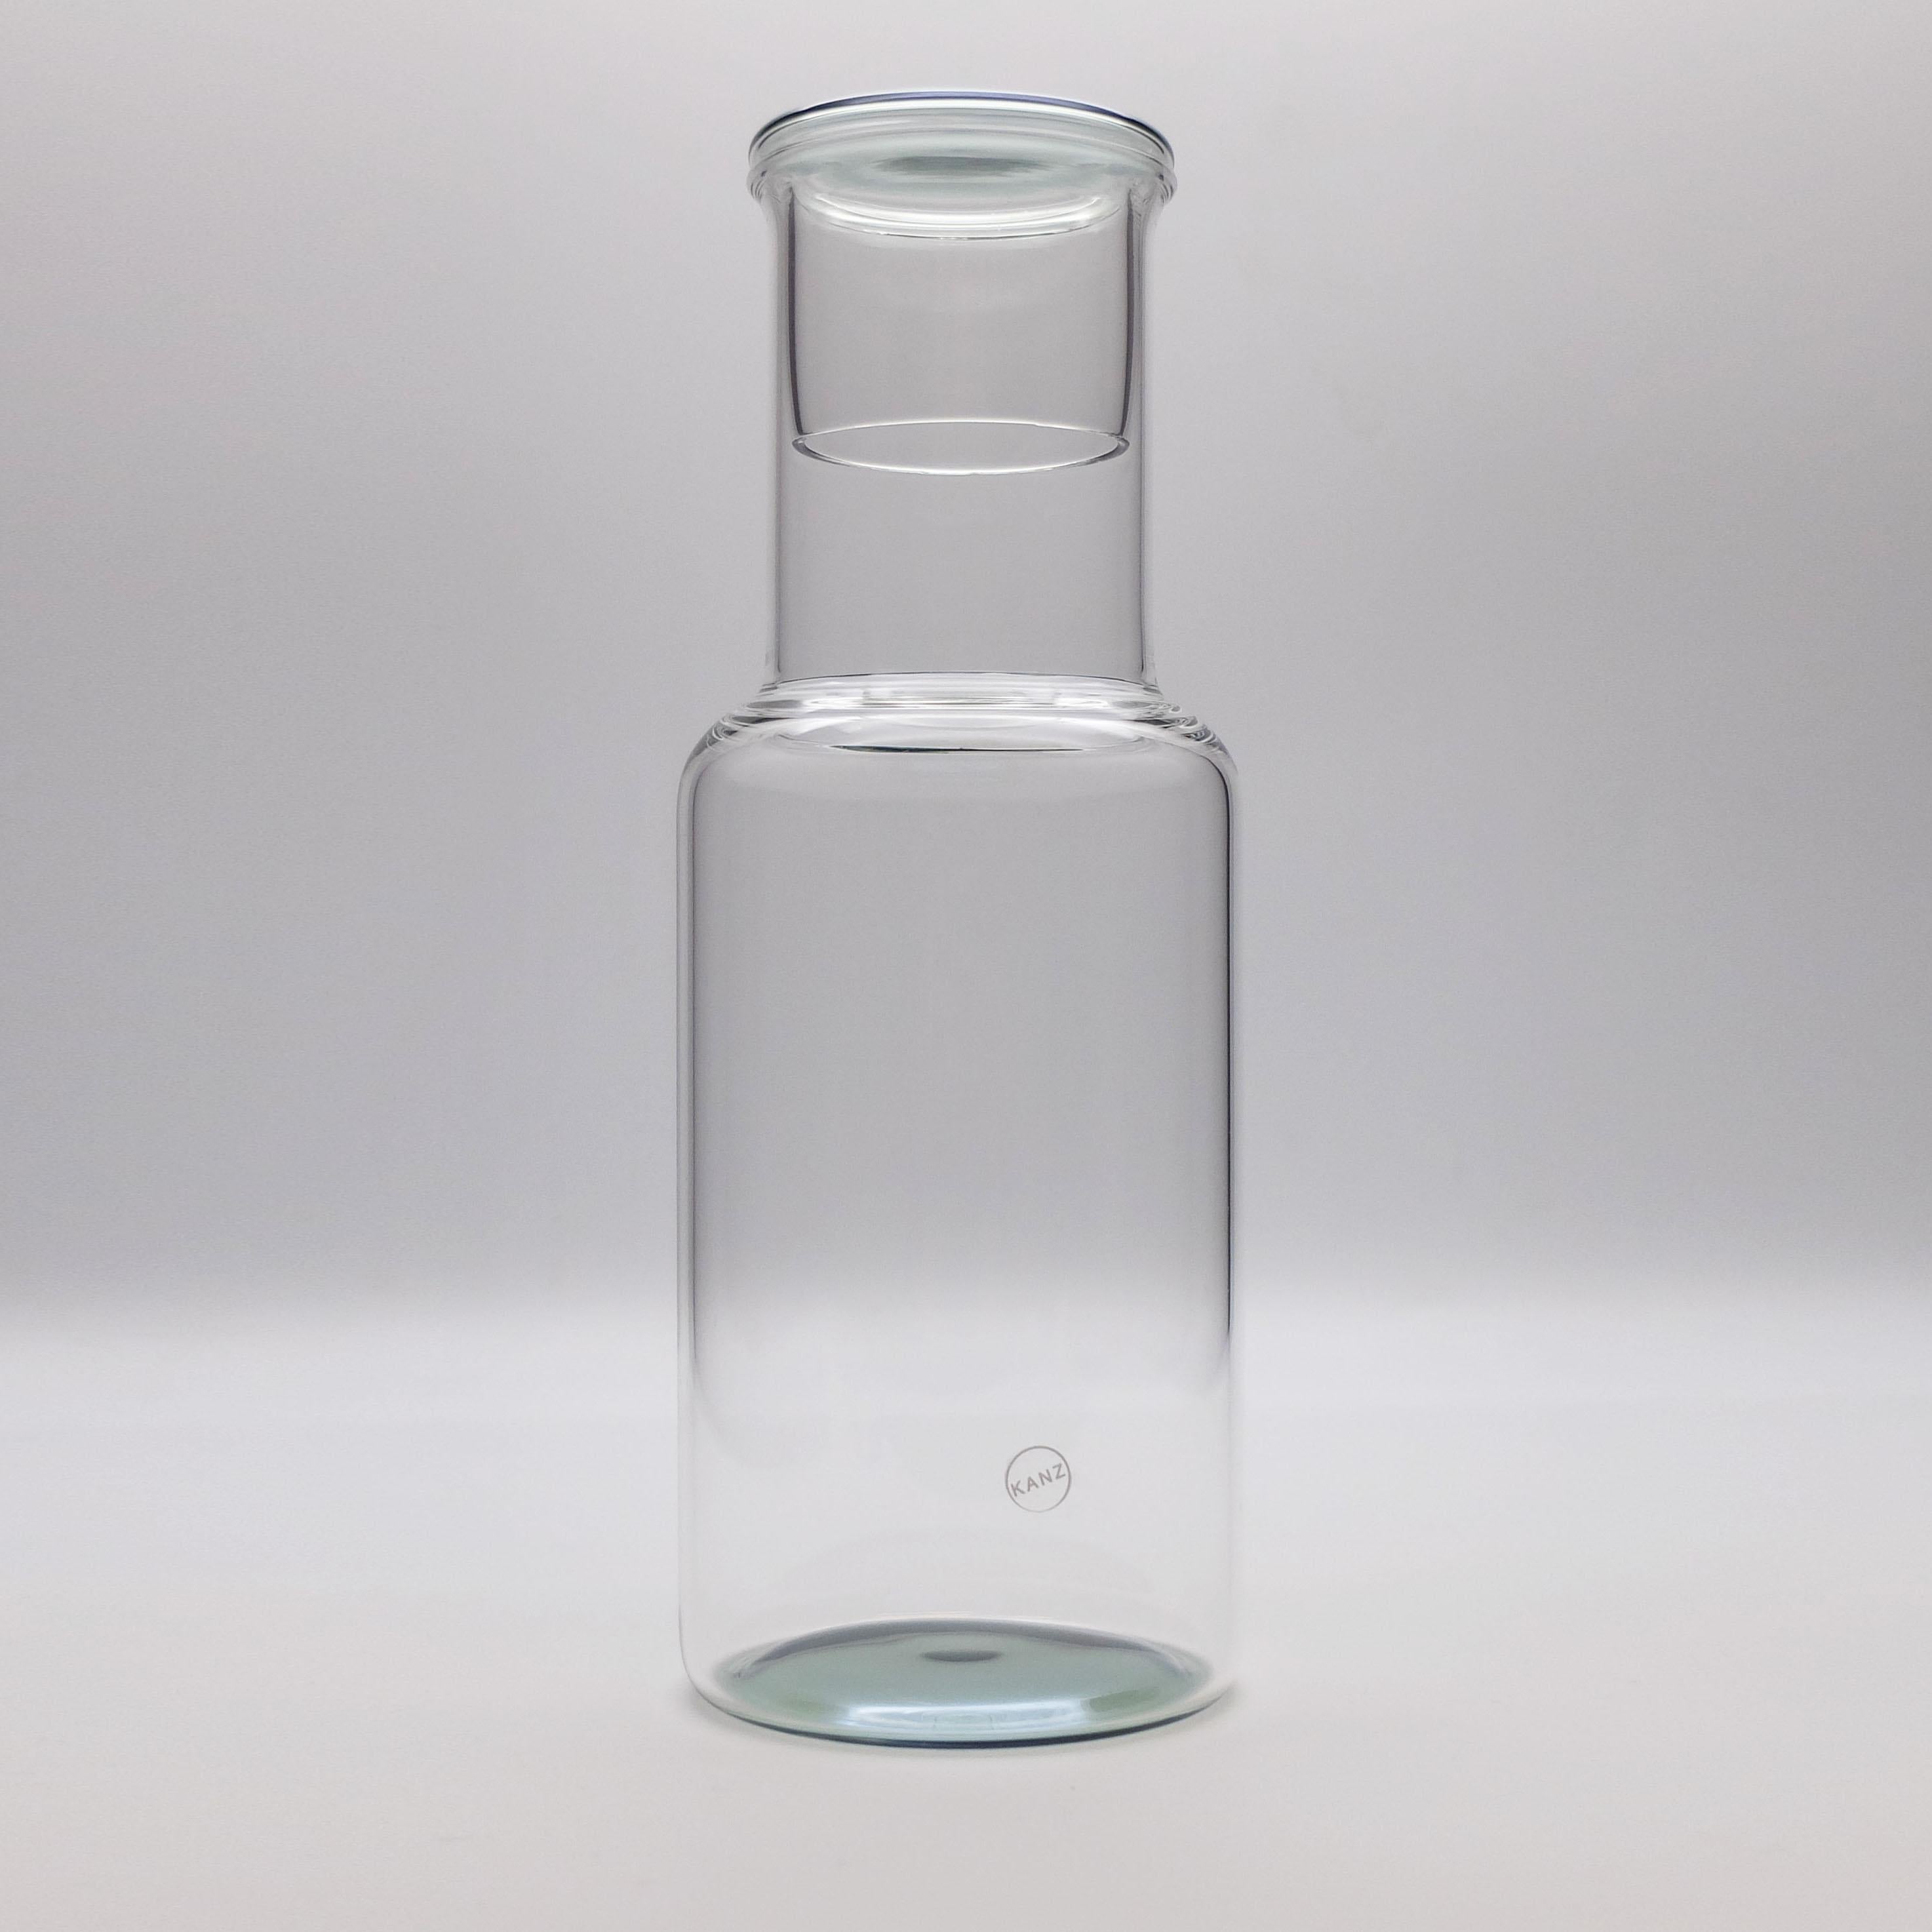 The Iride bottle in borosilicate glass, is handmade by master glass makers.
Each piece is unique and is characterized by extreme transparency. The bottom and the cap are painted by hand. The cap can be used as a glass.
Minimal variations in shape,